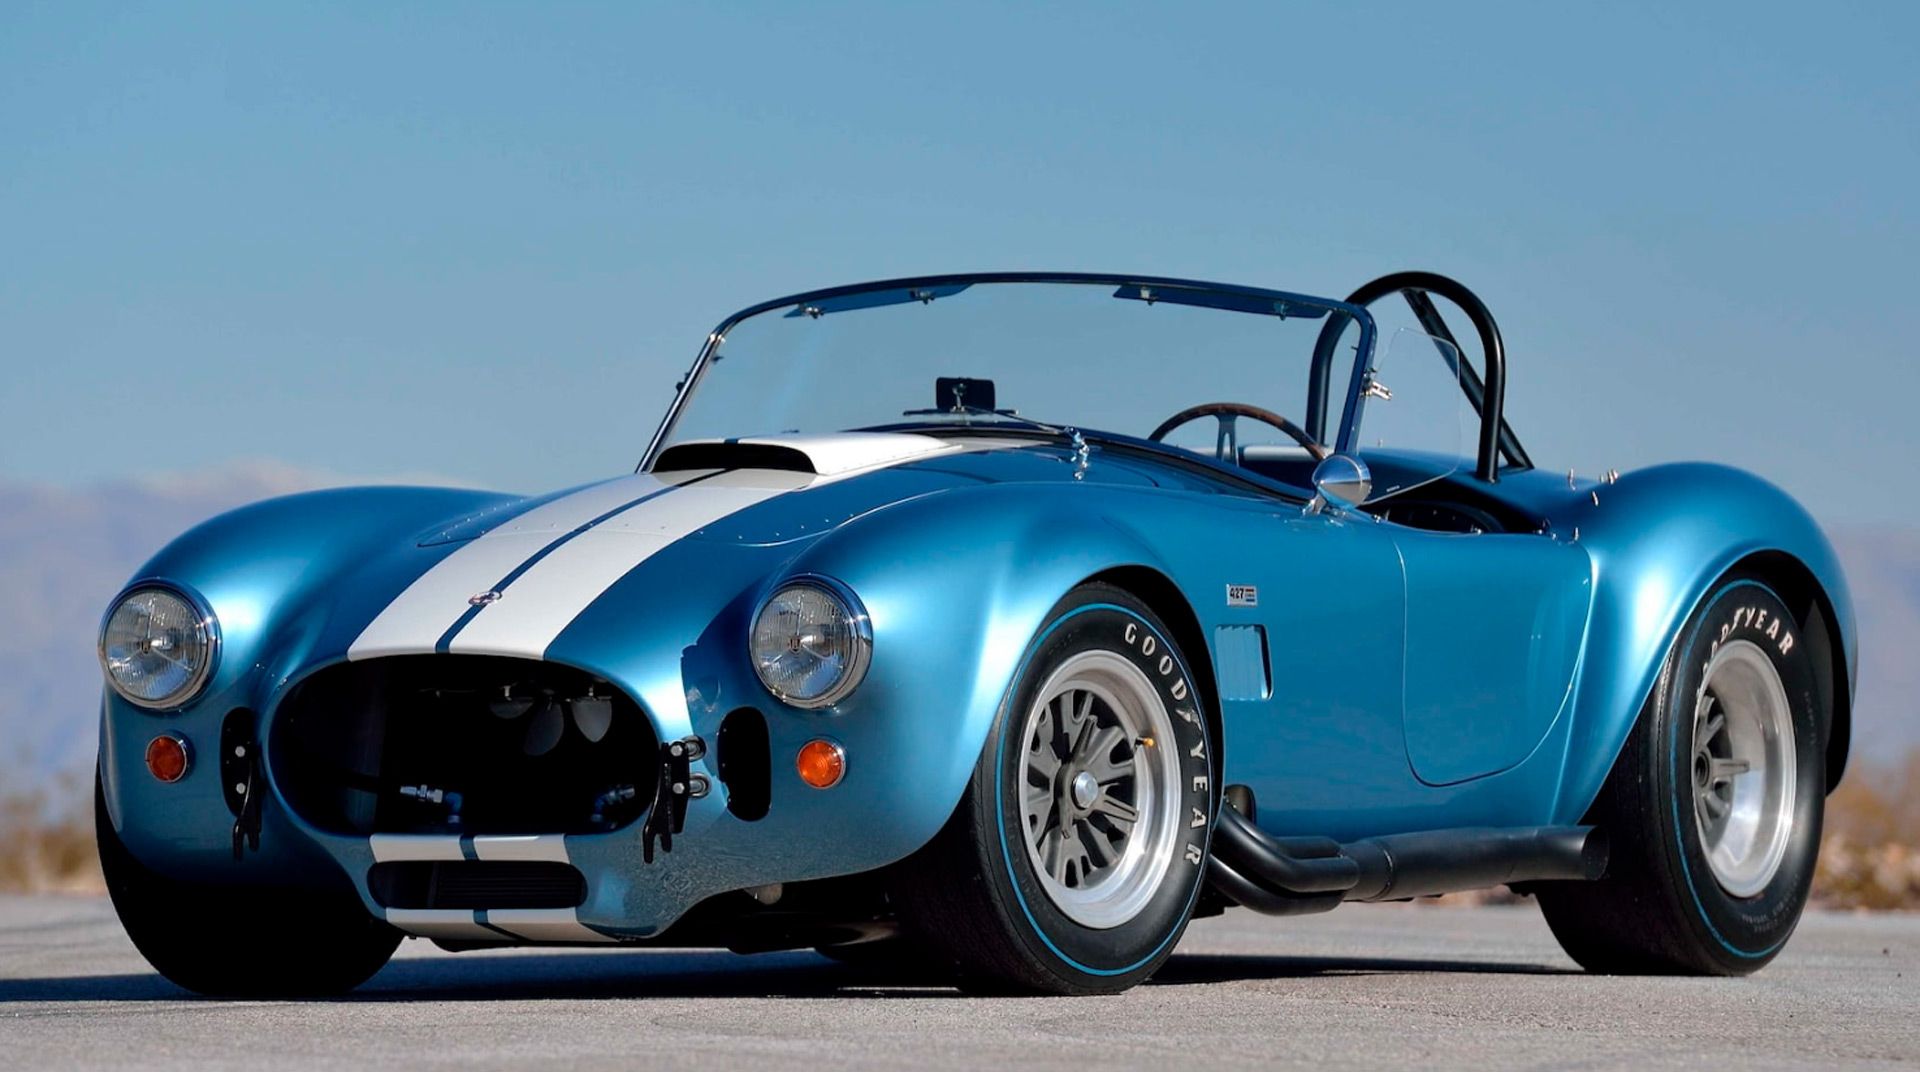 Bright Blue Shelby Cobra with white stripes showing off its charm under sunlight